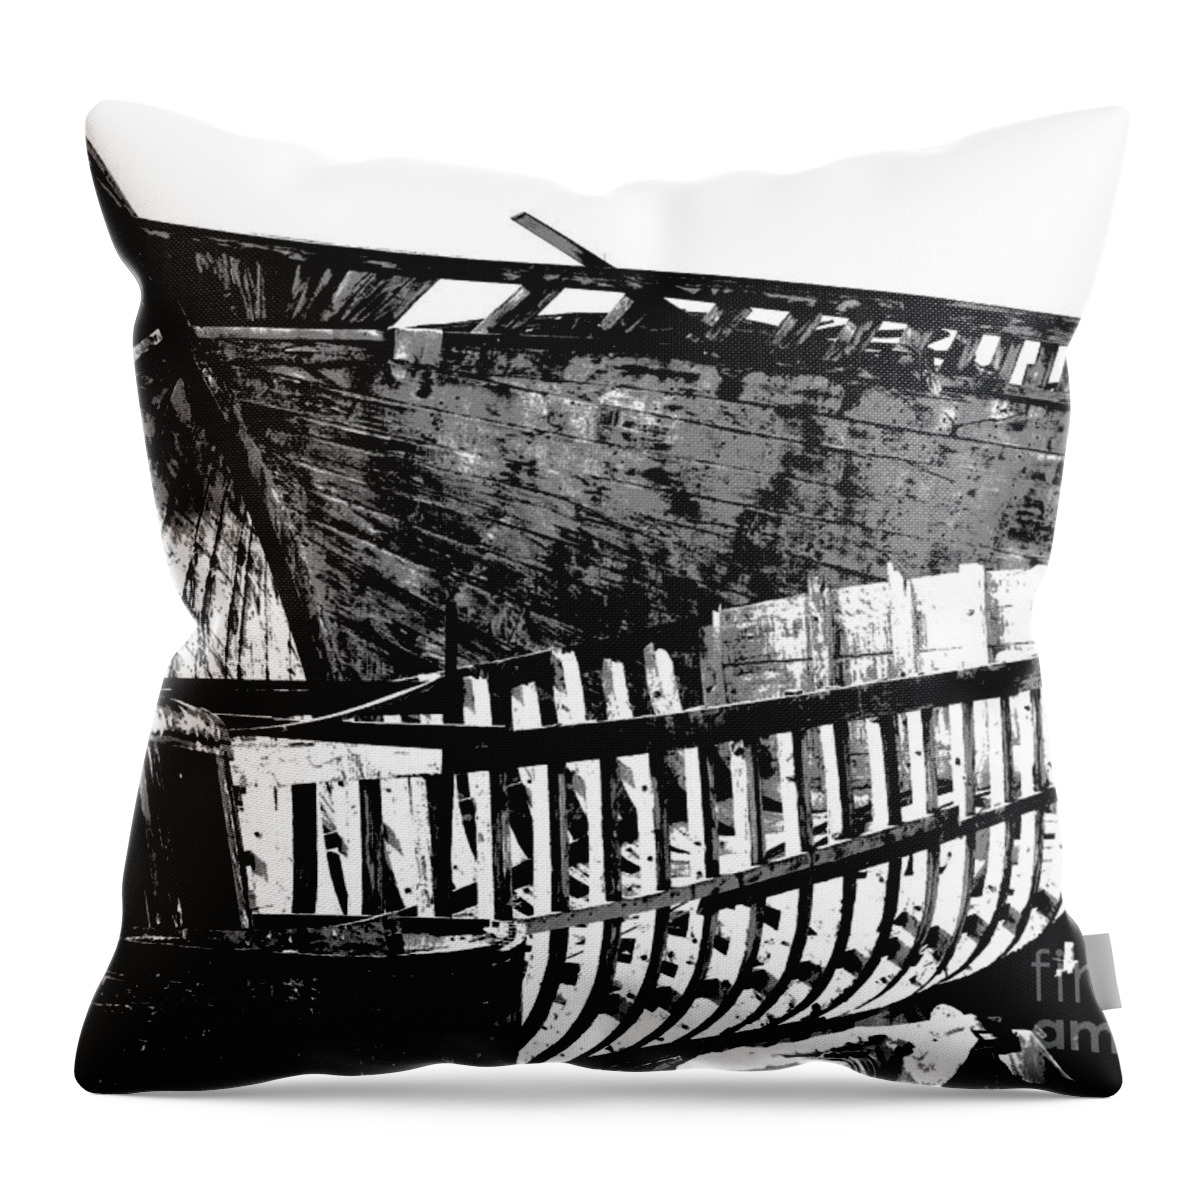 Black And White Throw Pillow featuring the photograph Alexandria Egypt - Boat Construction by Jacqueline M Lewis